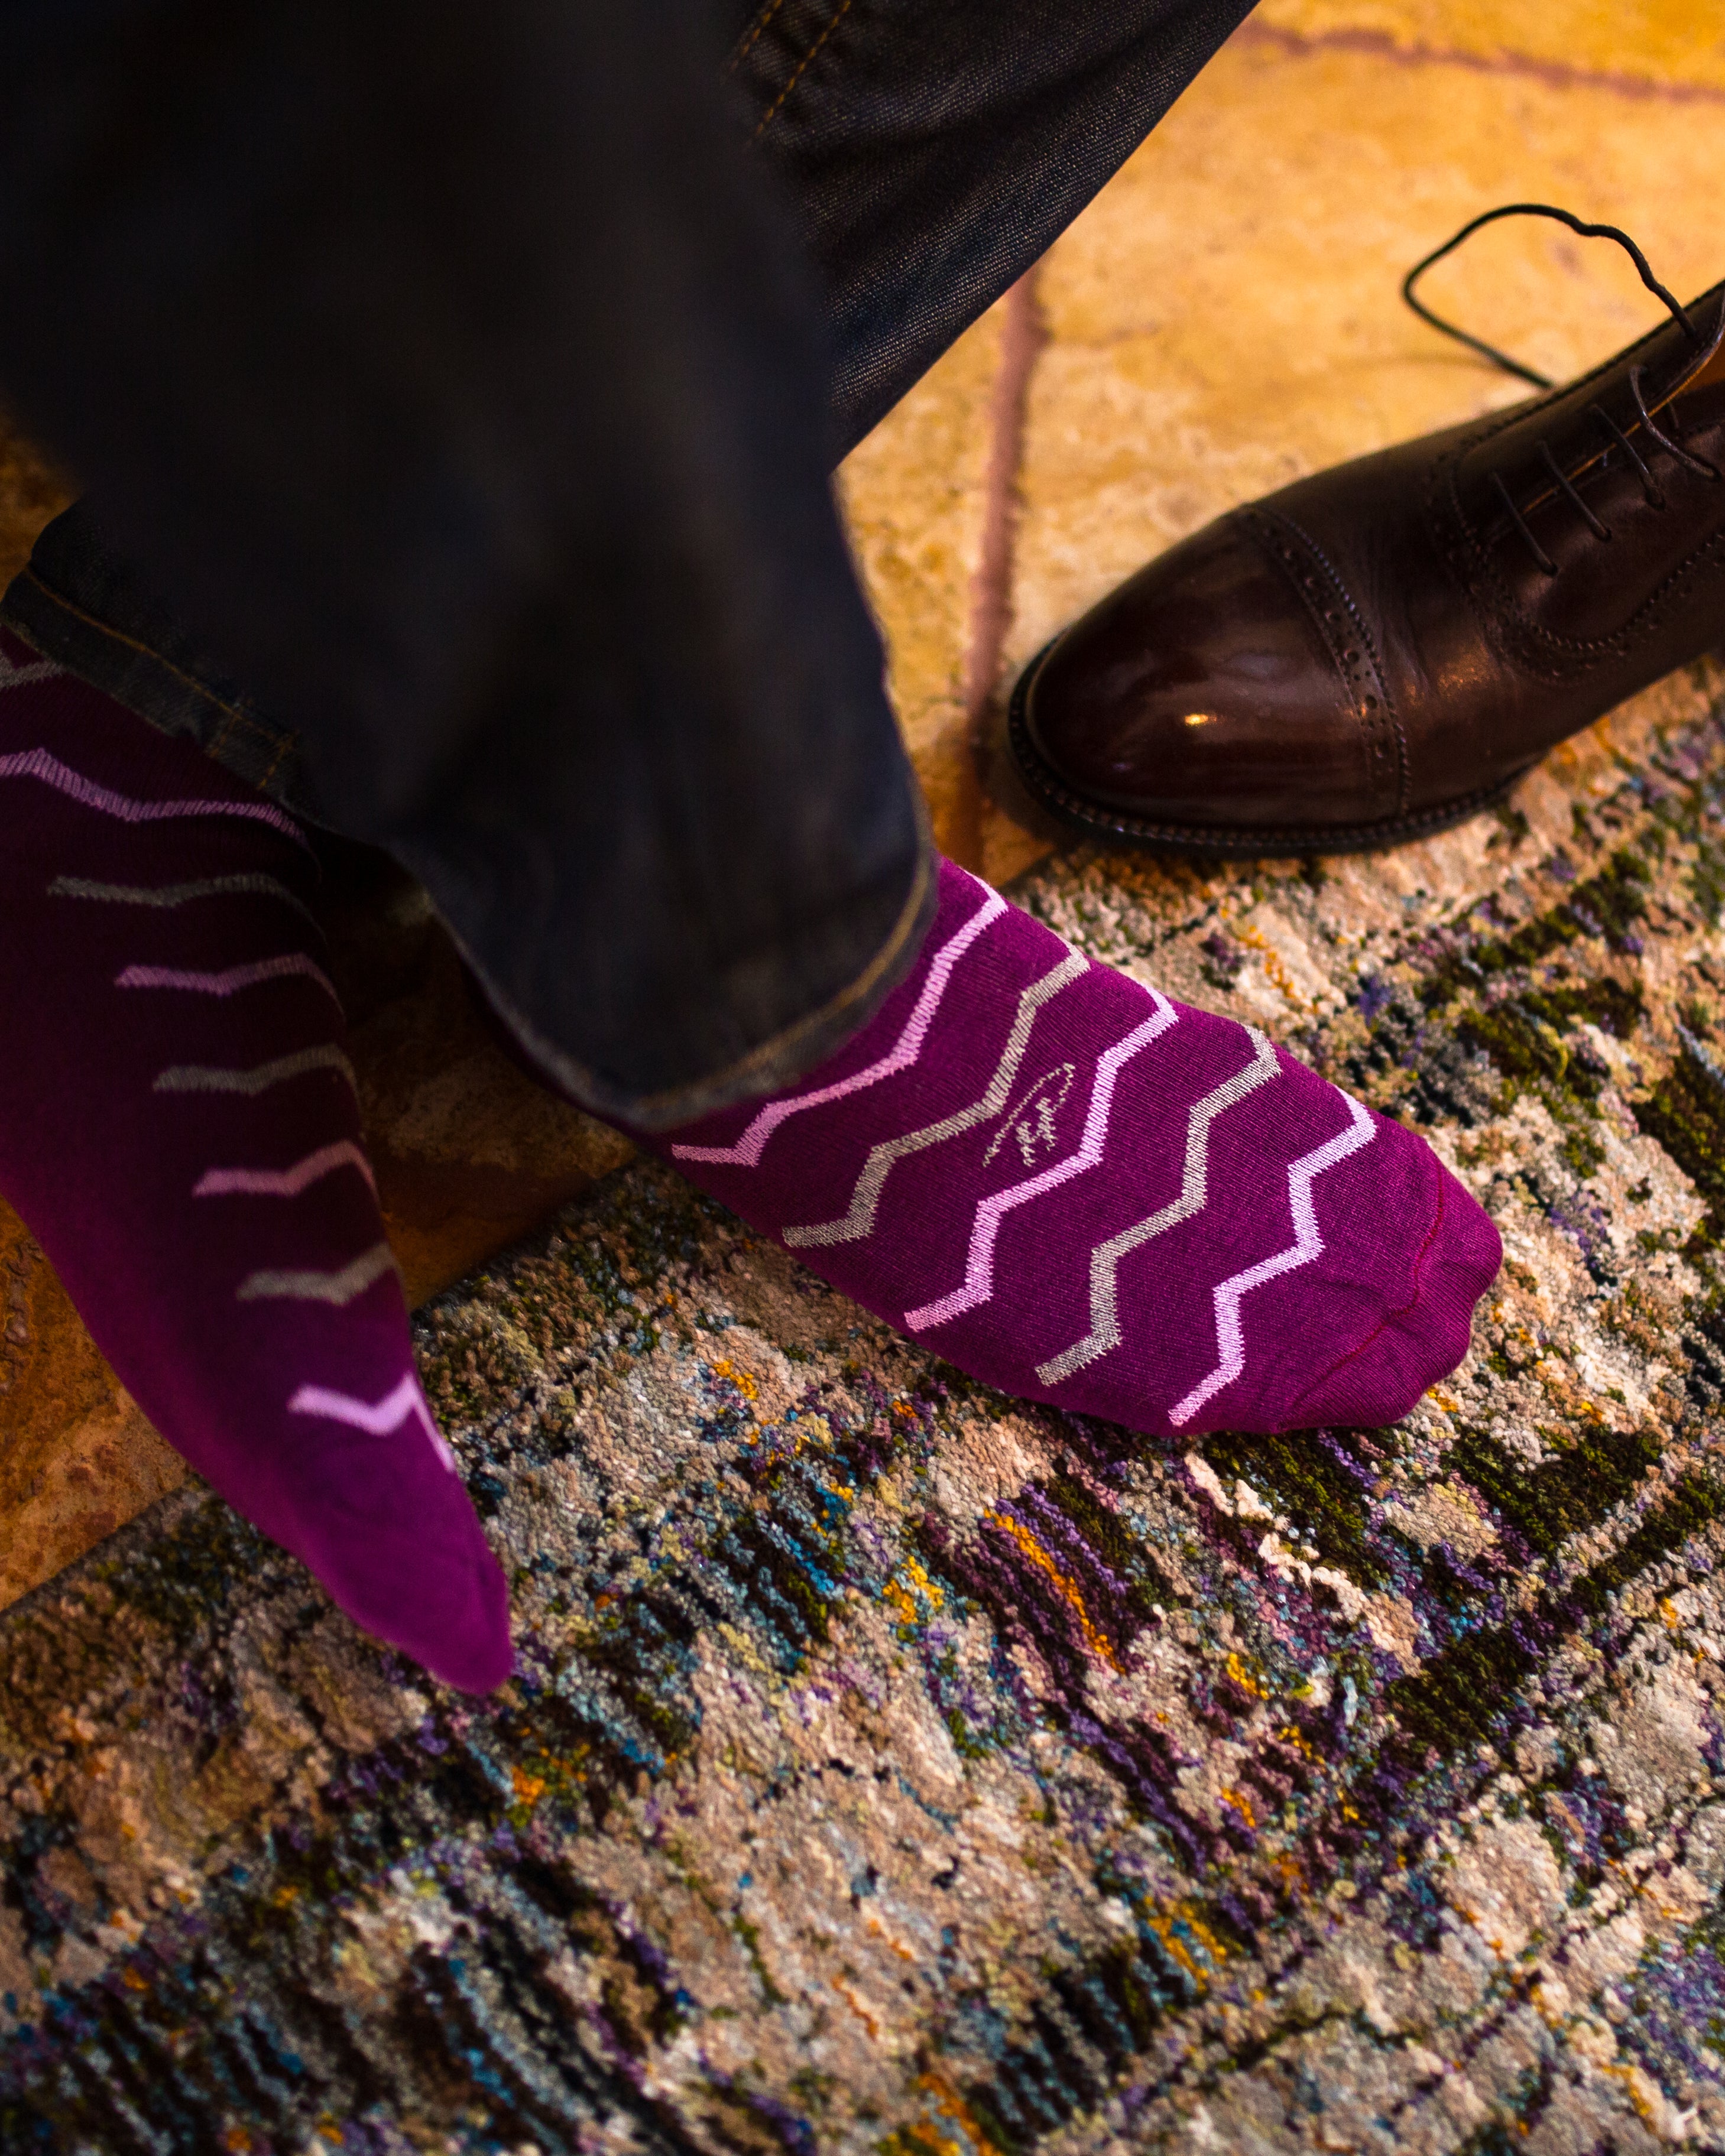 purple over the calf dress socks with grey and pink zigzag lines, brown dress shoe on the floor, blue jeans